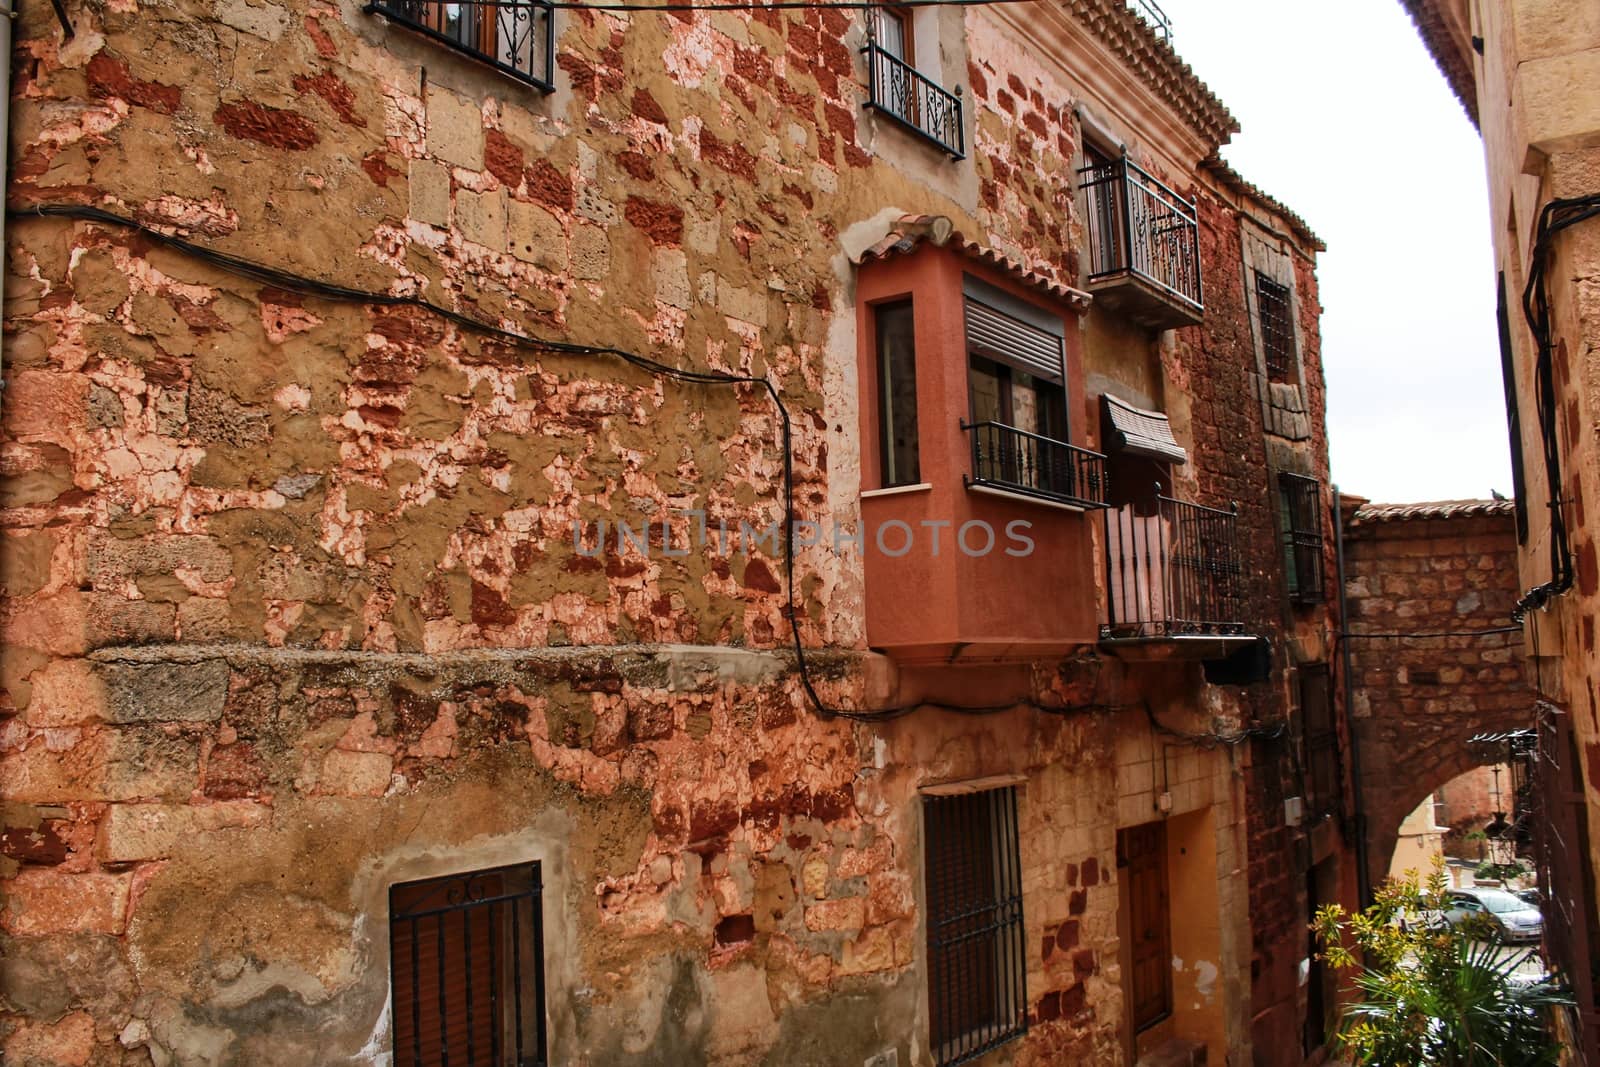 Narrow streets with Renaissance style houses and carved facades in Alcaraz, Castile-la Mancha community, Spain